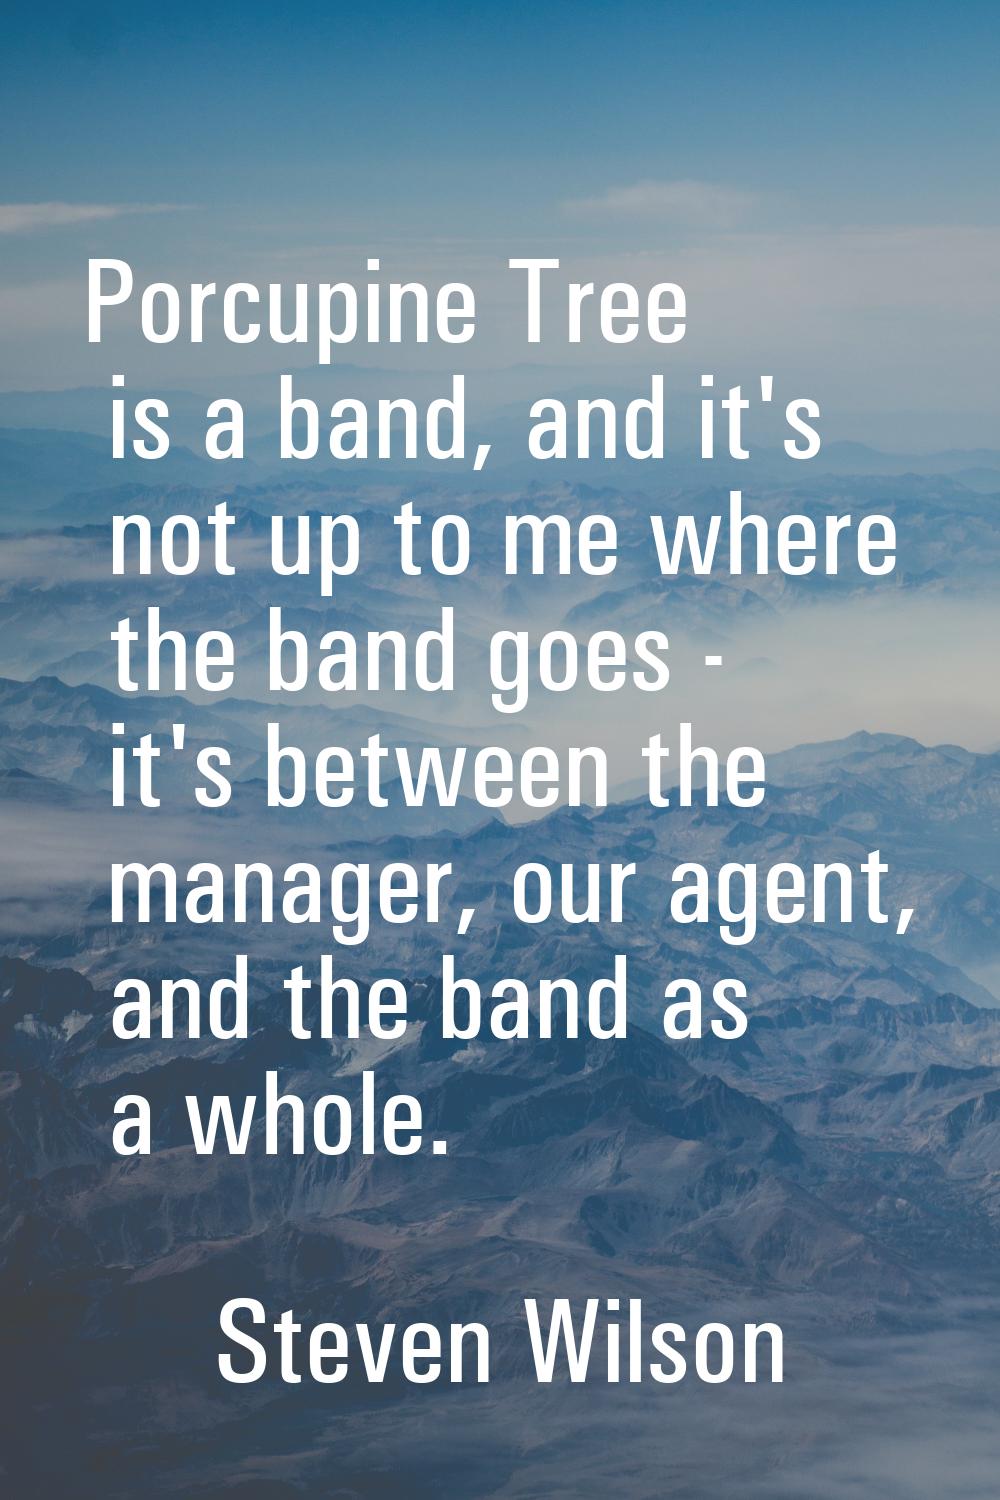 Porcupine Tree is a band, and it's not up to me where the band goes - it's between the manager, our